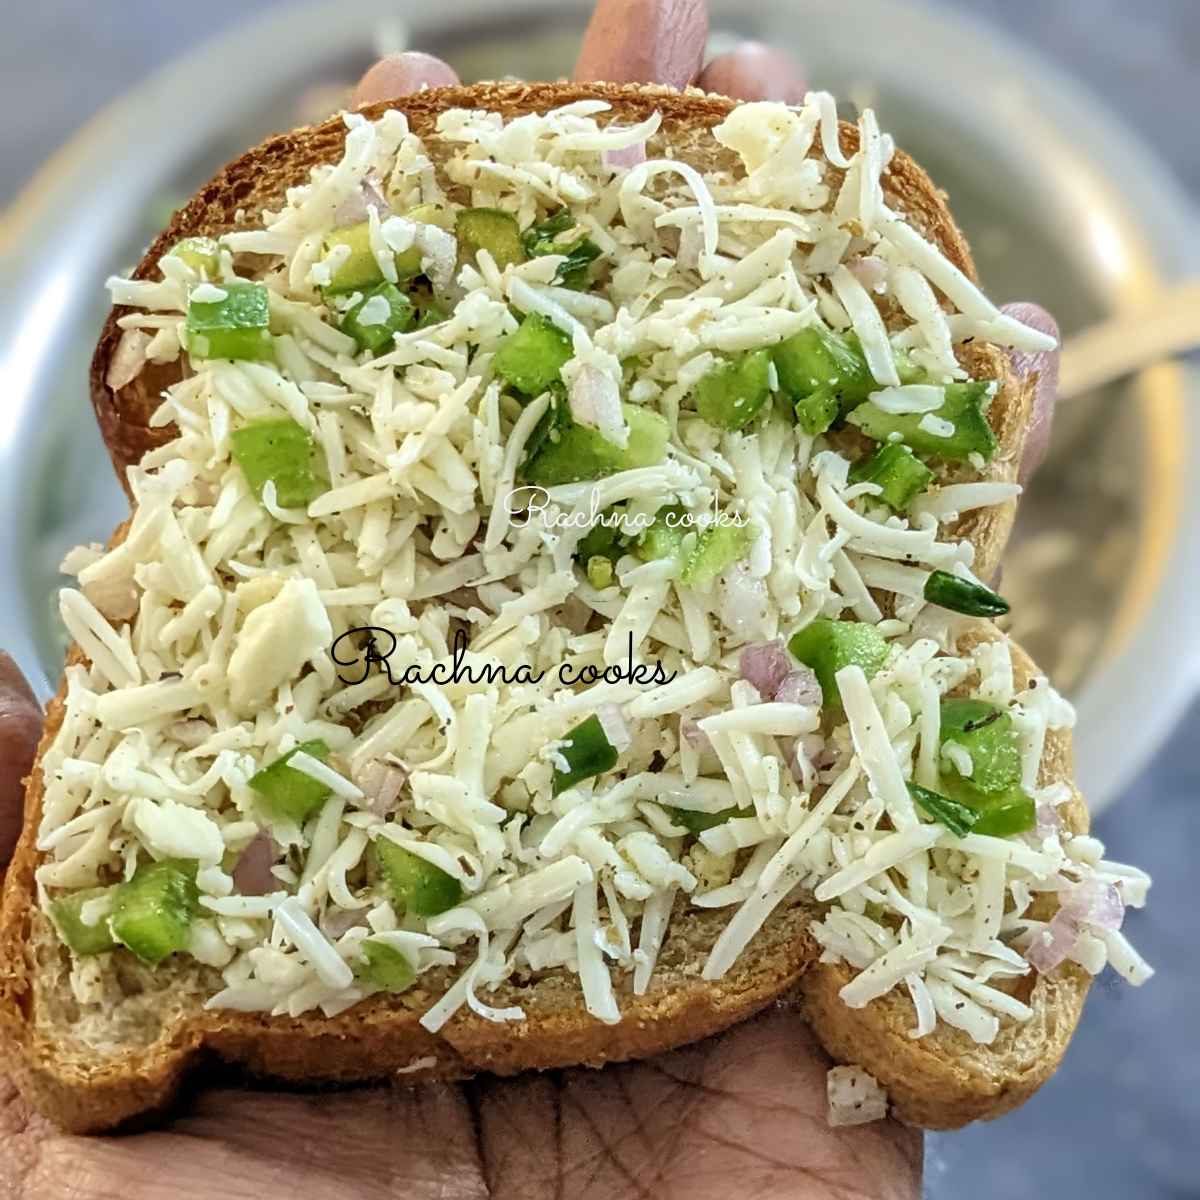 One toast topped with cheesy topping held up in hand.